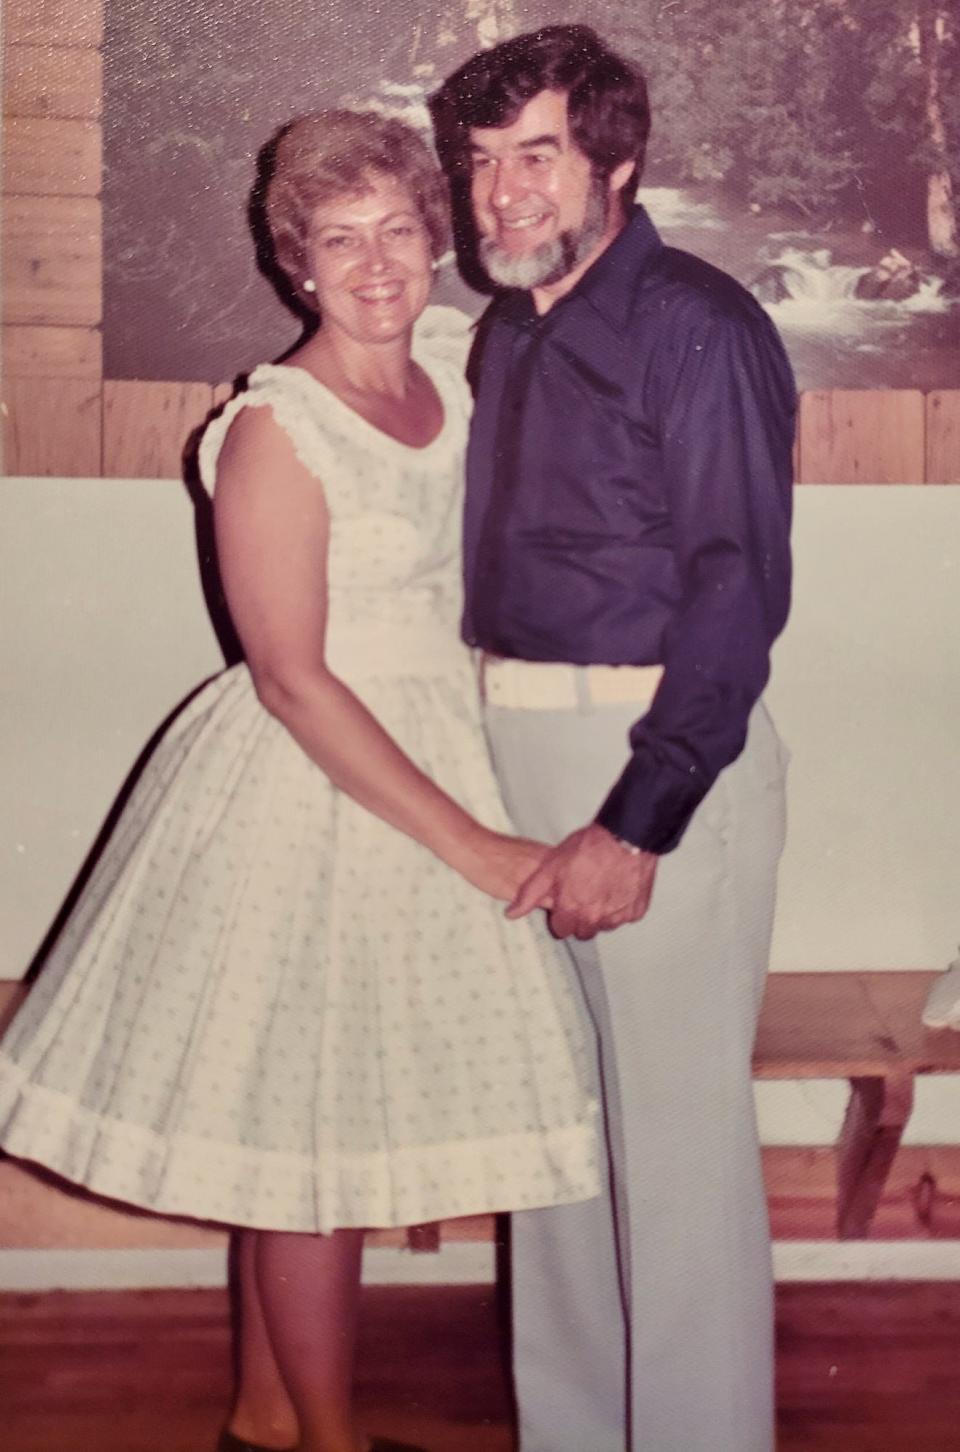 Janice and Ted Reeder were married six months after a blind date in 1952